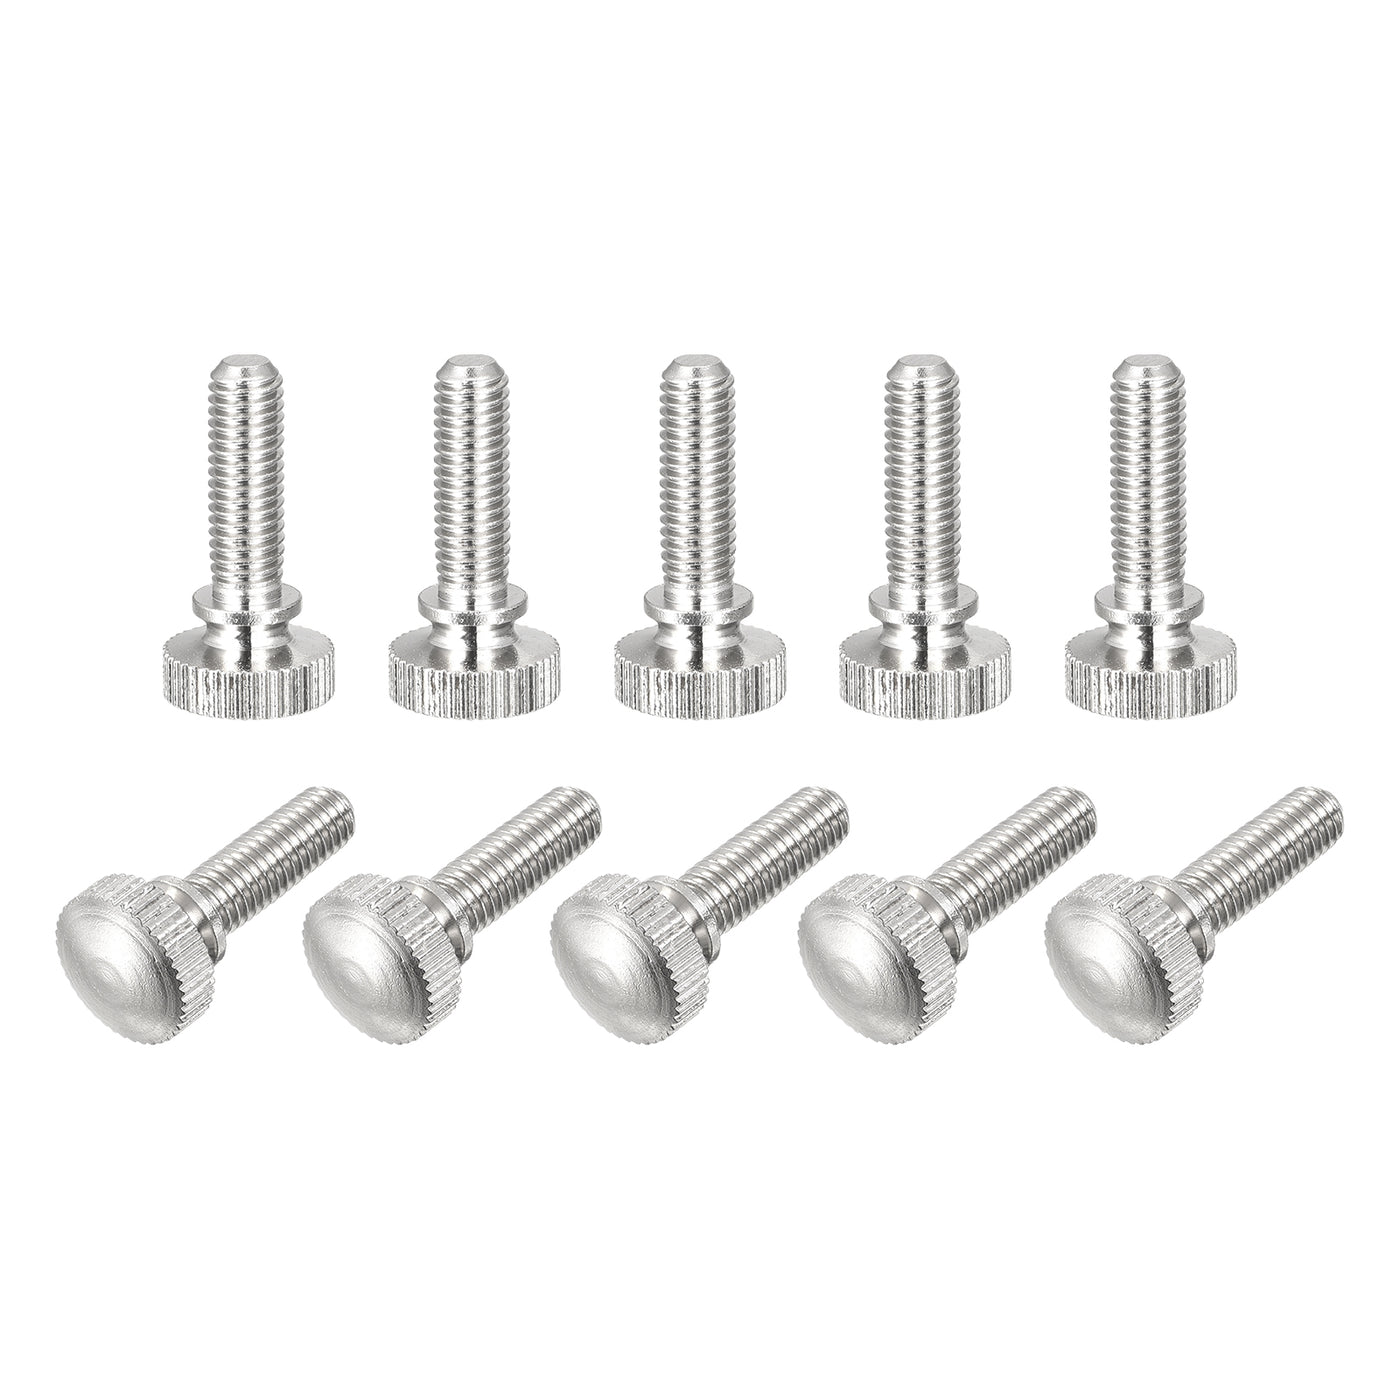 uxcell Uxcell Knurled Thumb Screws, M5x16mm Brass Shoulder Bolts Grip Knobs Fasteners, Nickel Plated 10Pcs